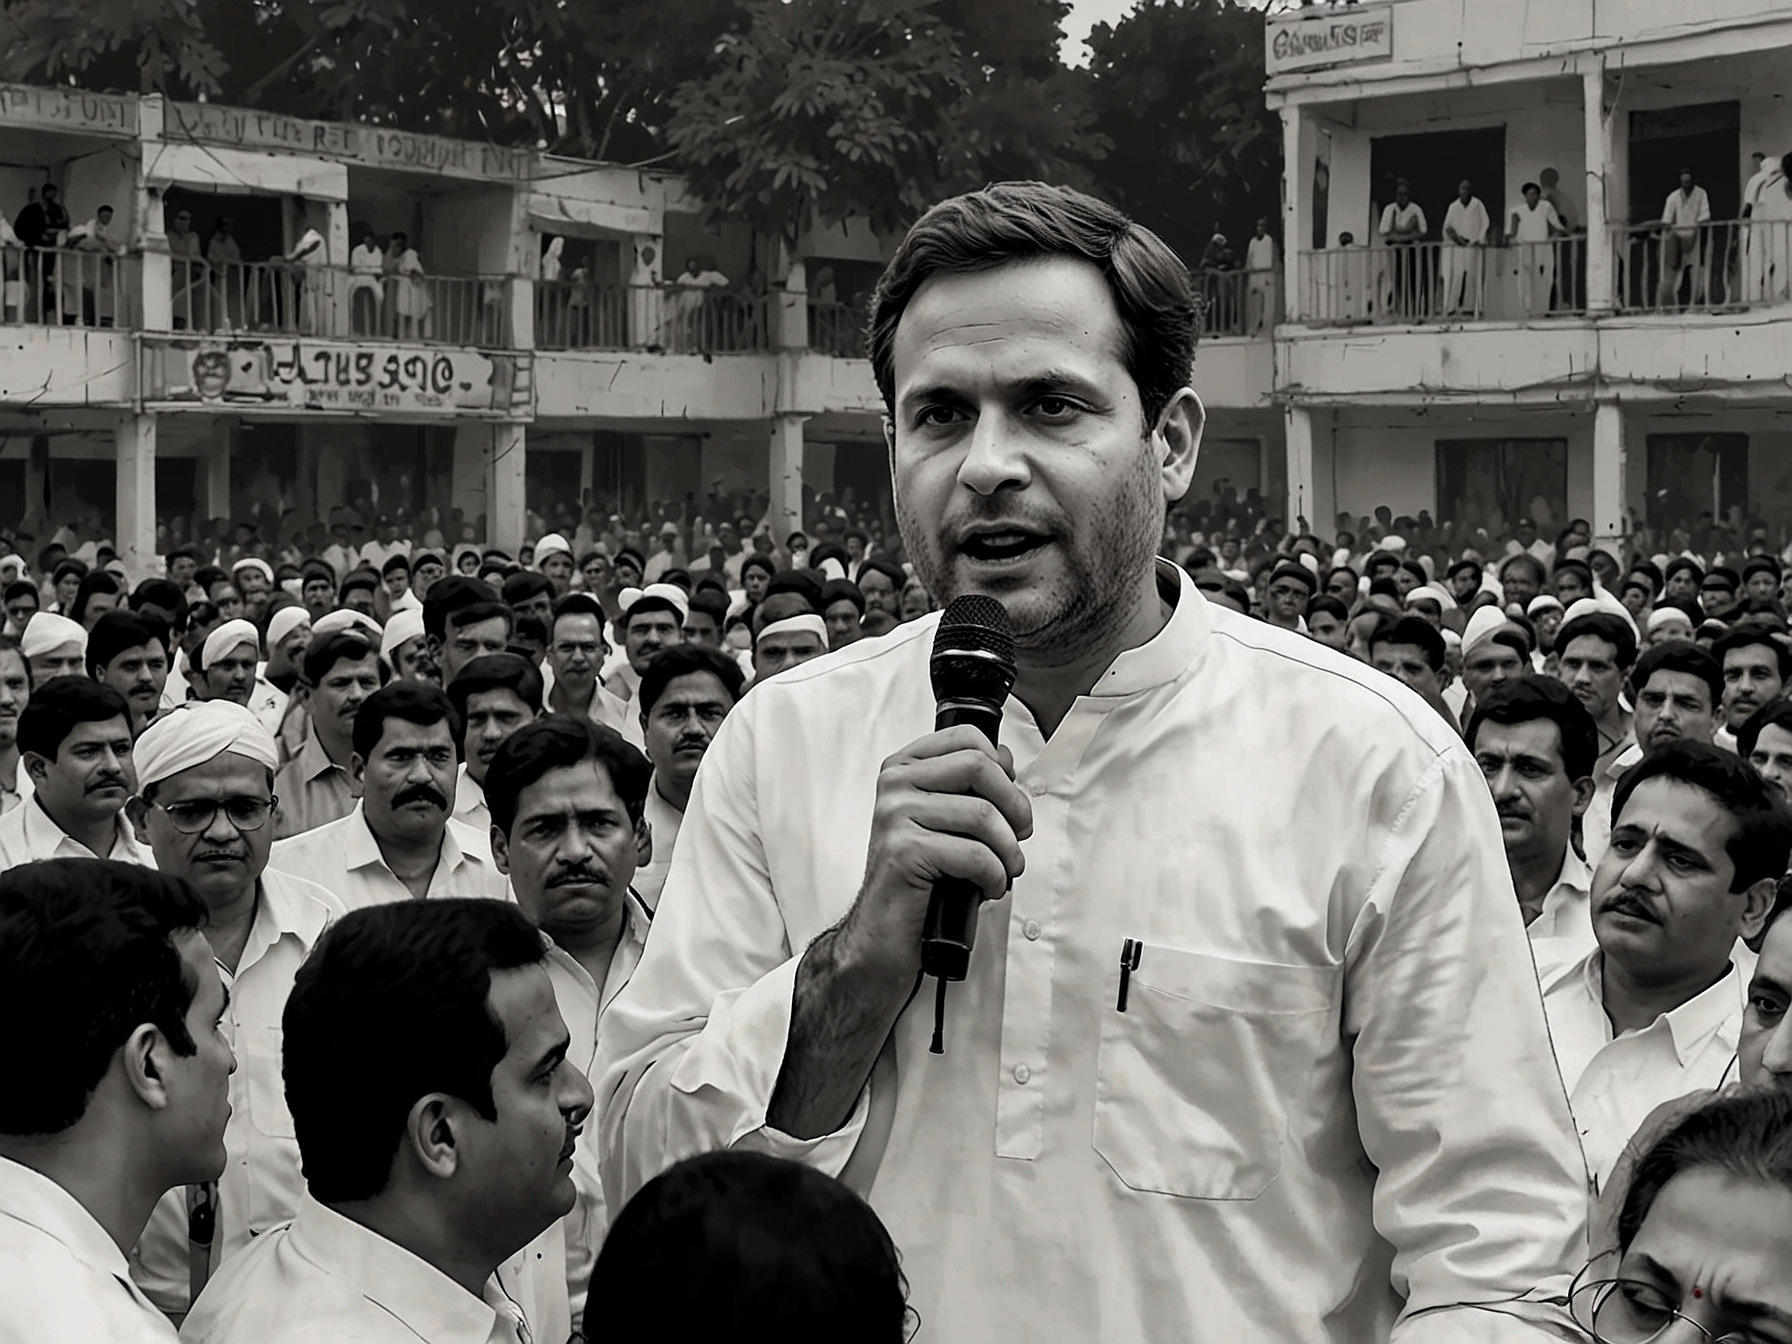 Rahul Gandhi addressing supporters in Raebareli, emphasizing the constituency's historical loyalty to the Gandhi family and underlining its strategic significance for the Congress Party.